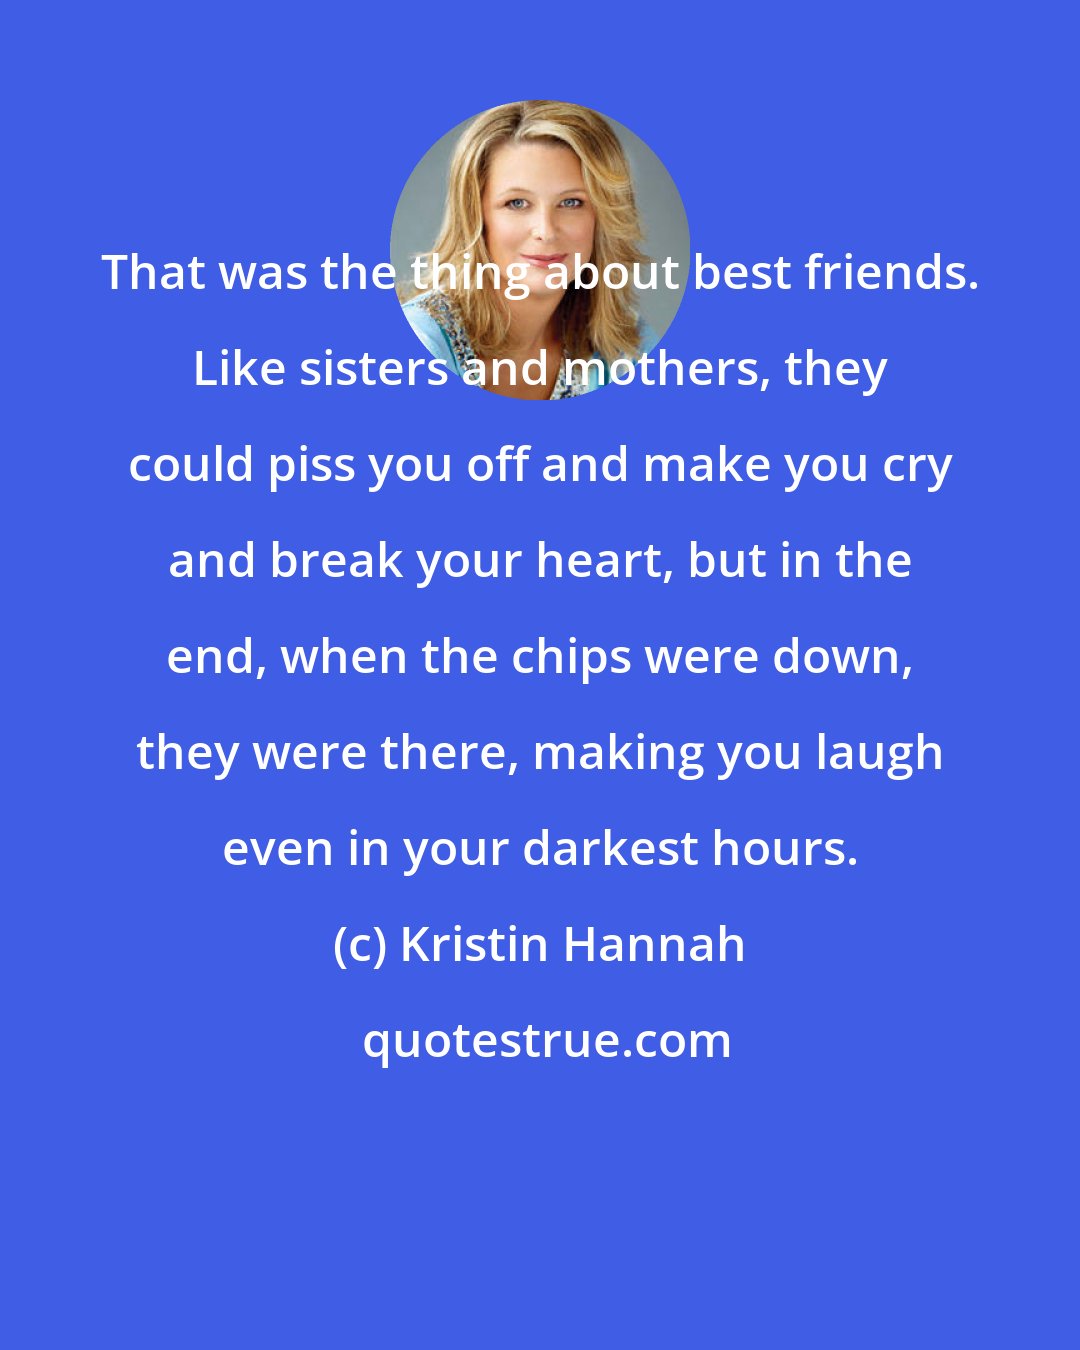 Kristin Hannah: That was the thing about best friends. Like sisters and mothers, they could piss you off and make you cry and break your heart, but in the end, when the chips were down, they were there, making you laugh even in your darkest hours.